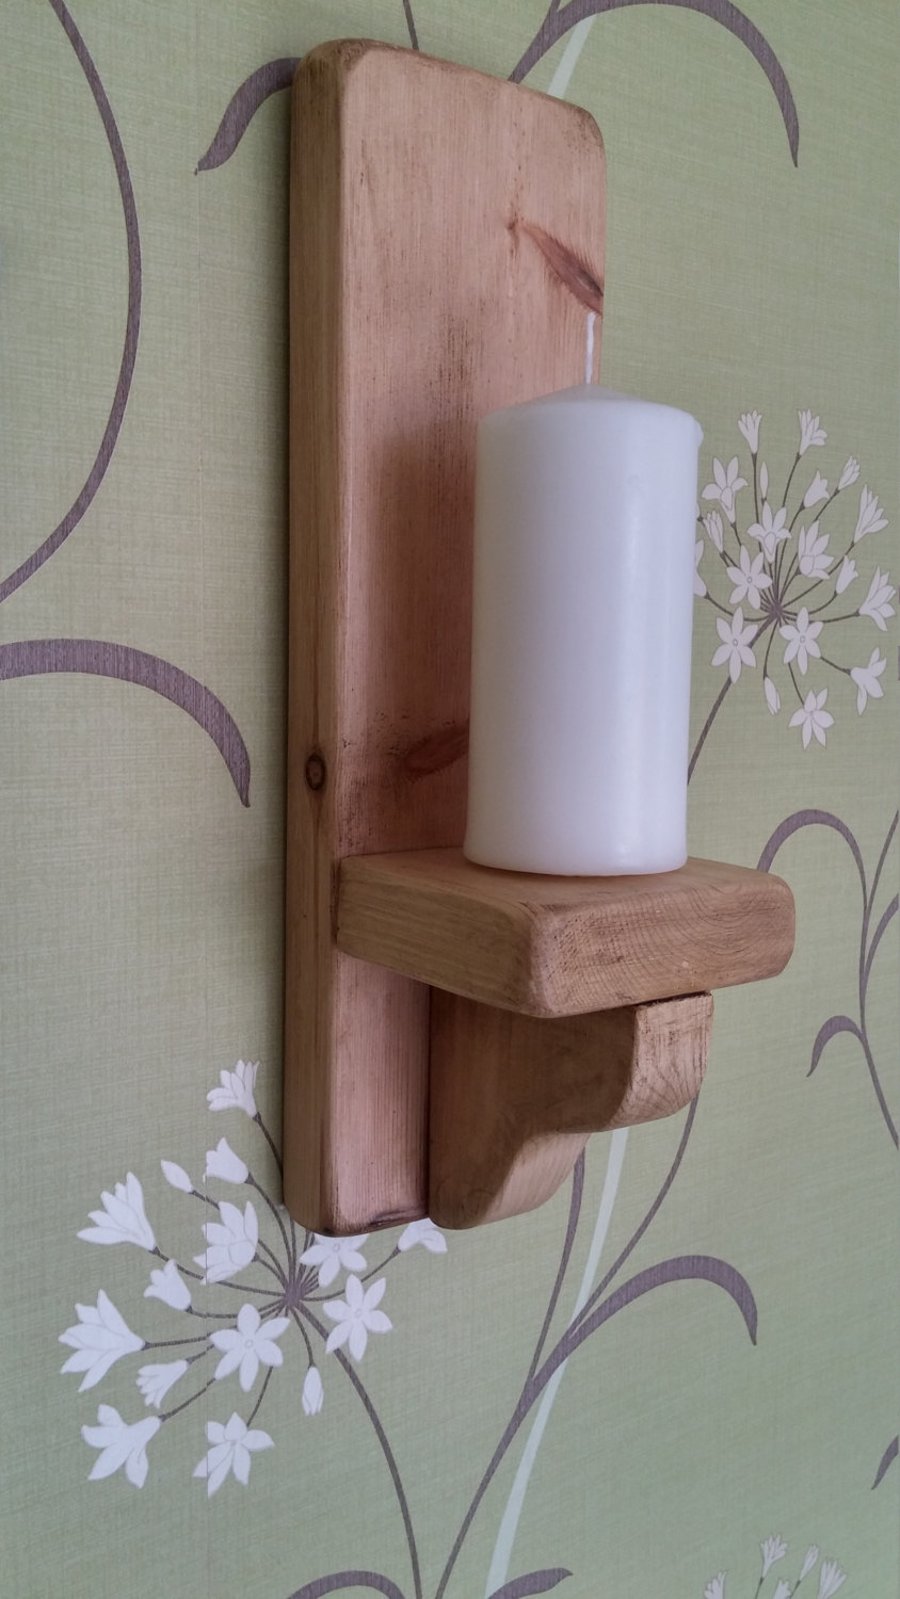 Pair of 39cm handmade bespoke rustic solid wood wall sconce candle holders